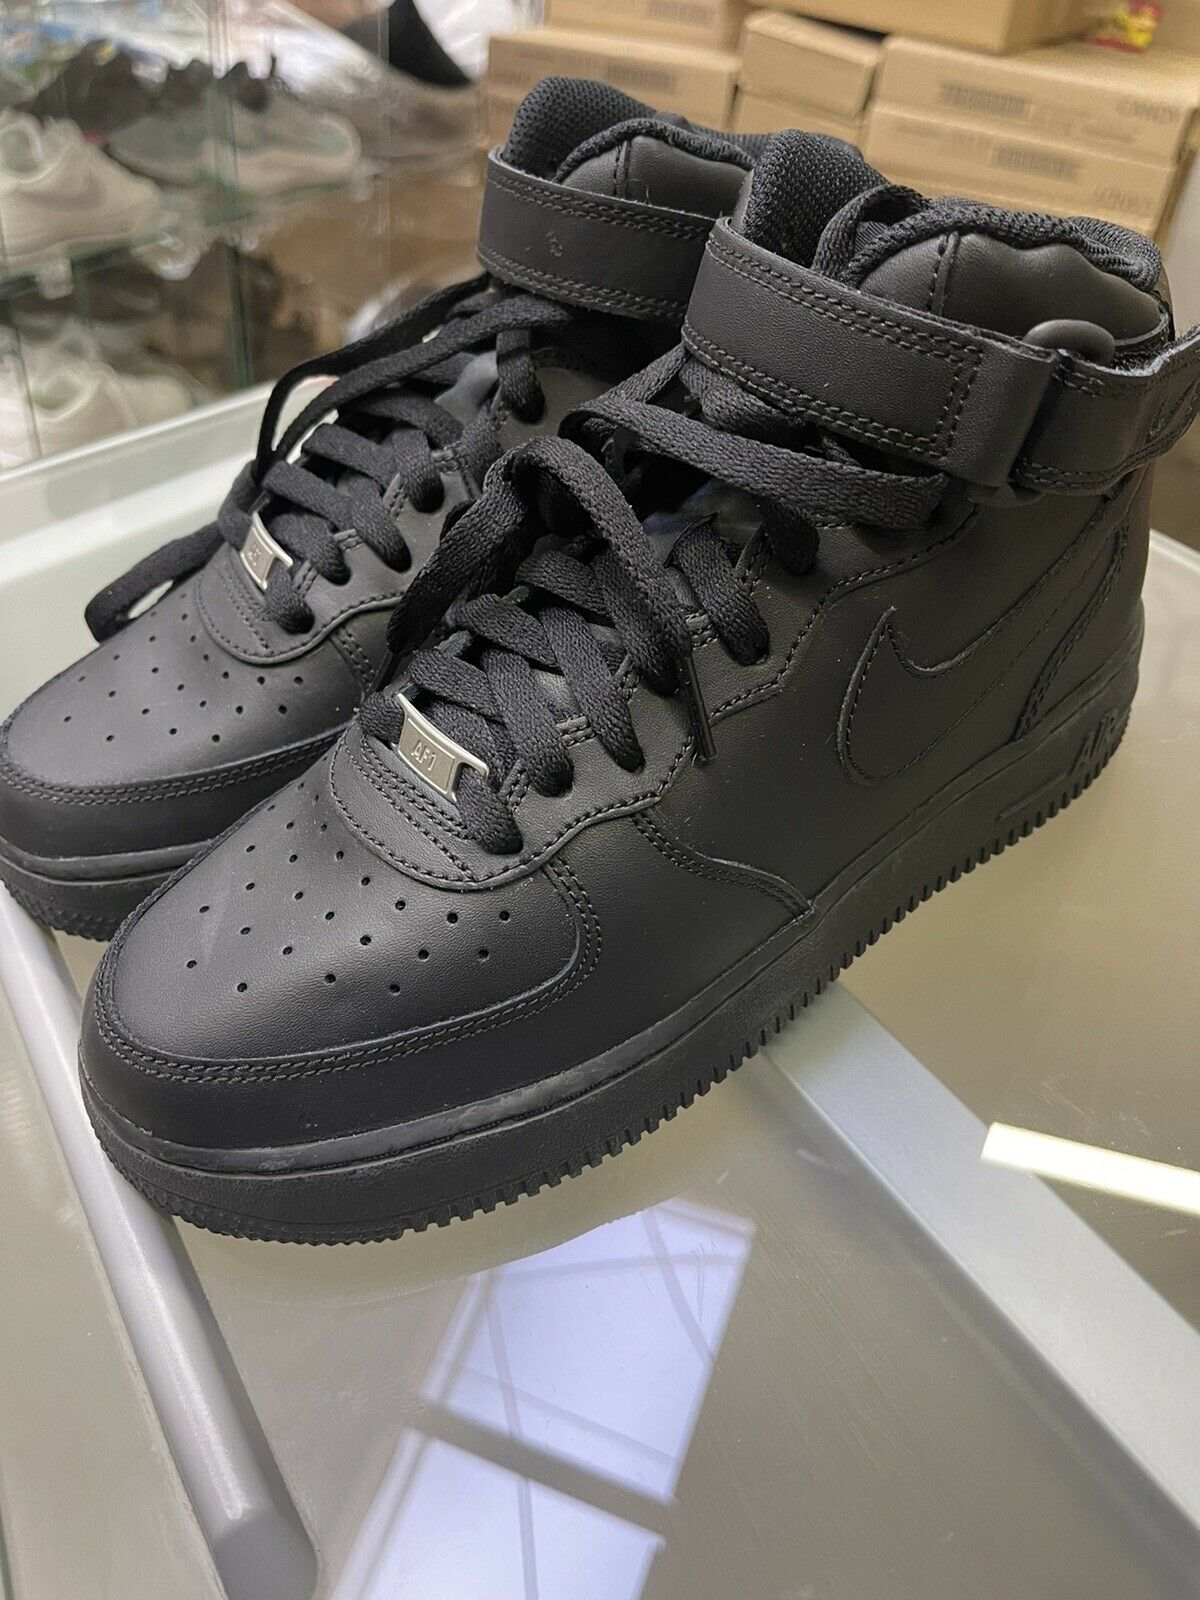 Nike air force 1 mid Le Sneaker Black DH2933-001 Women's Girl Casual Shoes 6.5Y